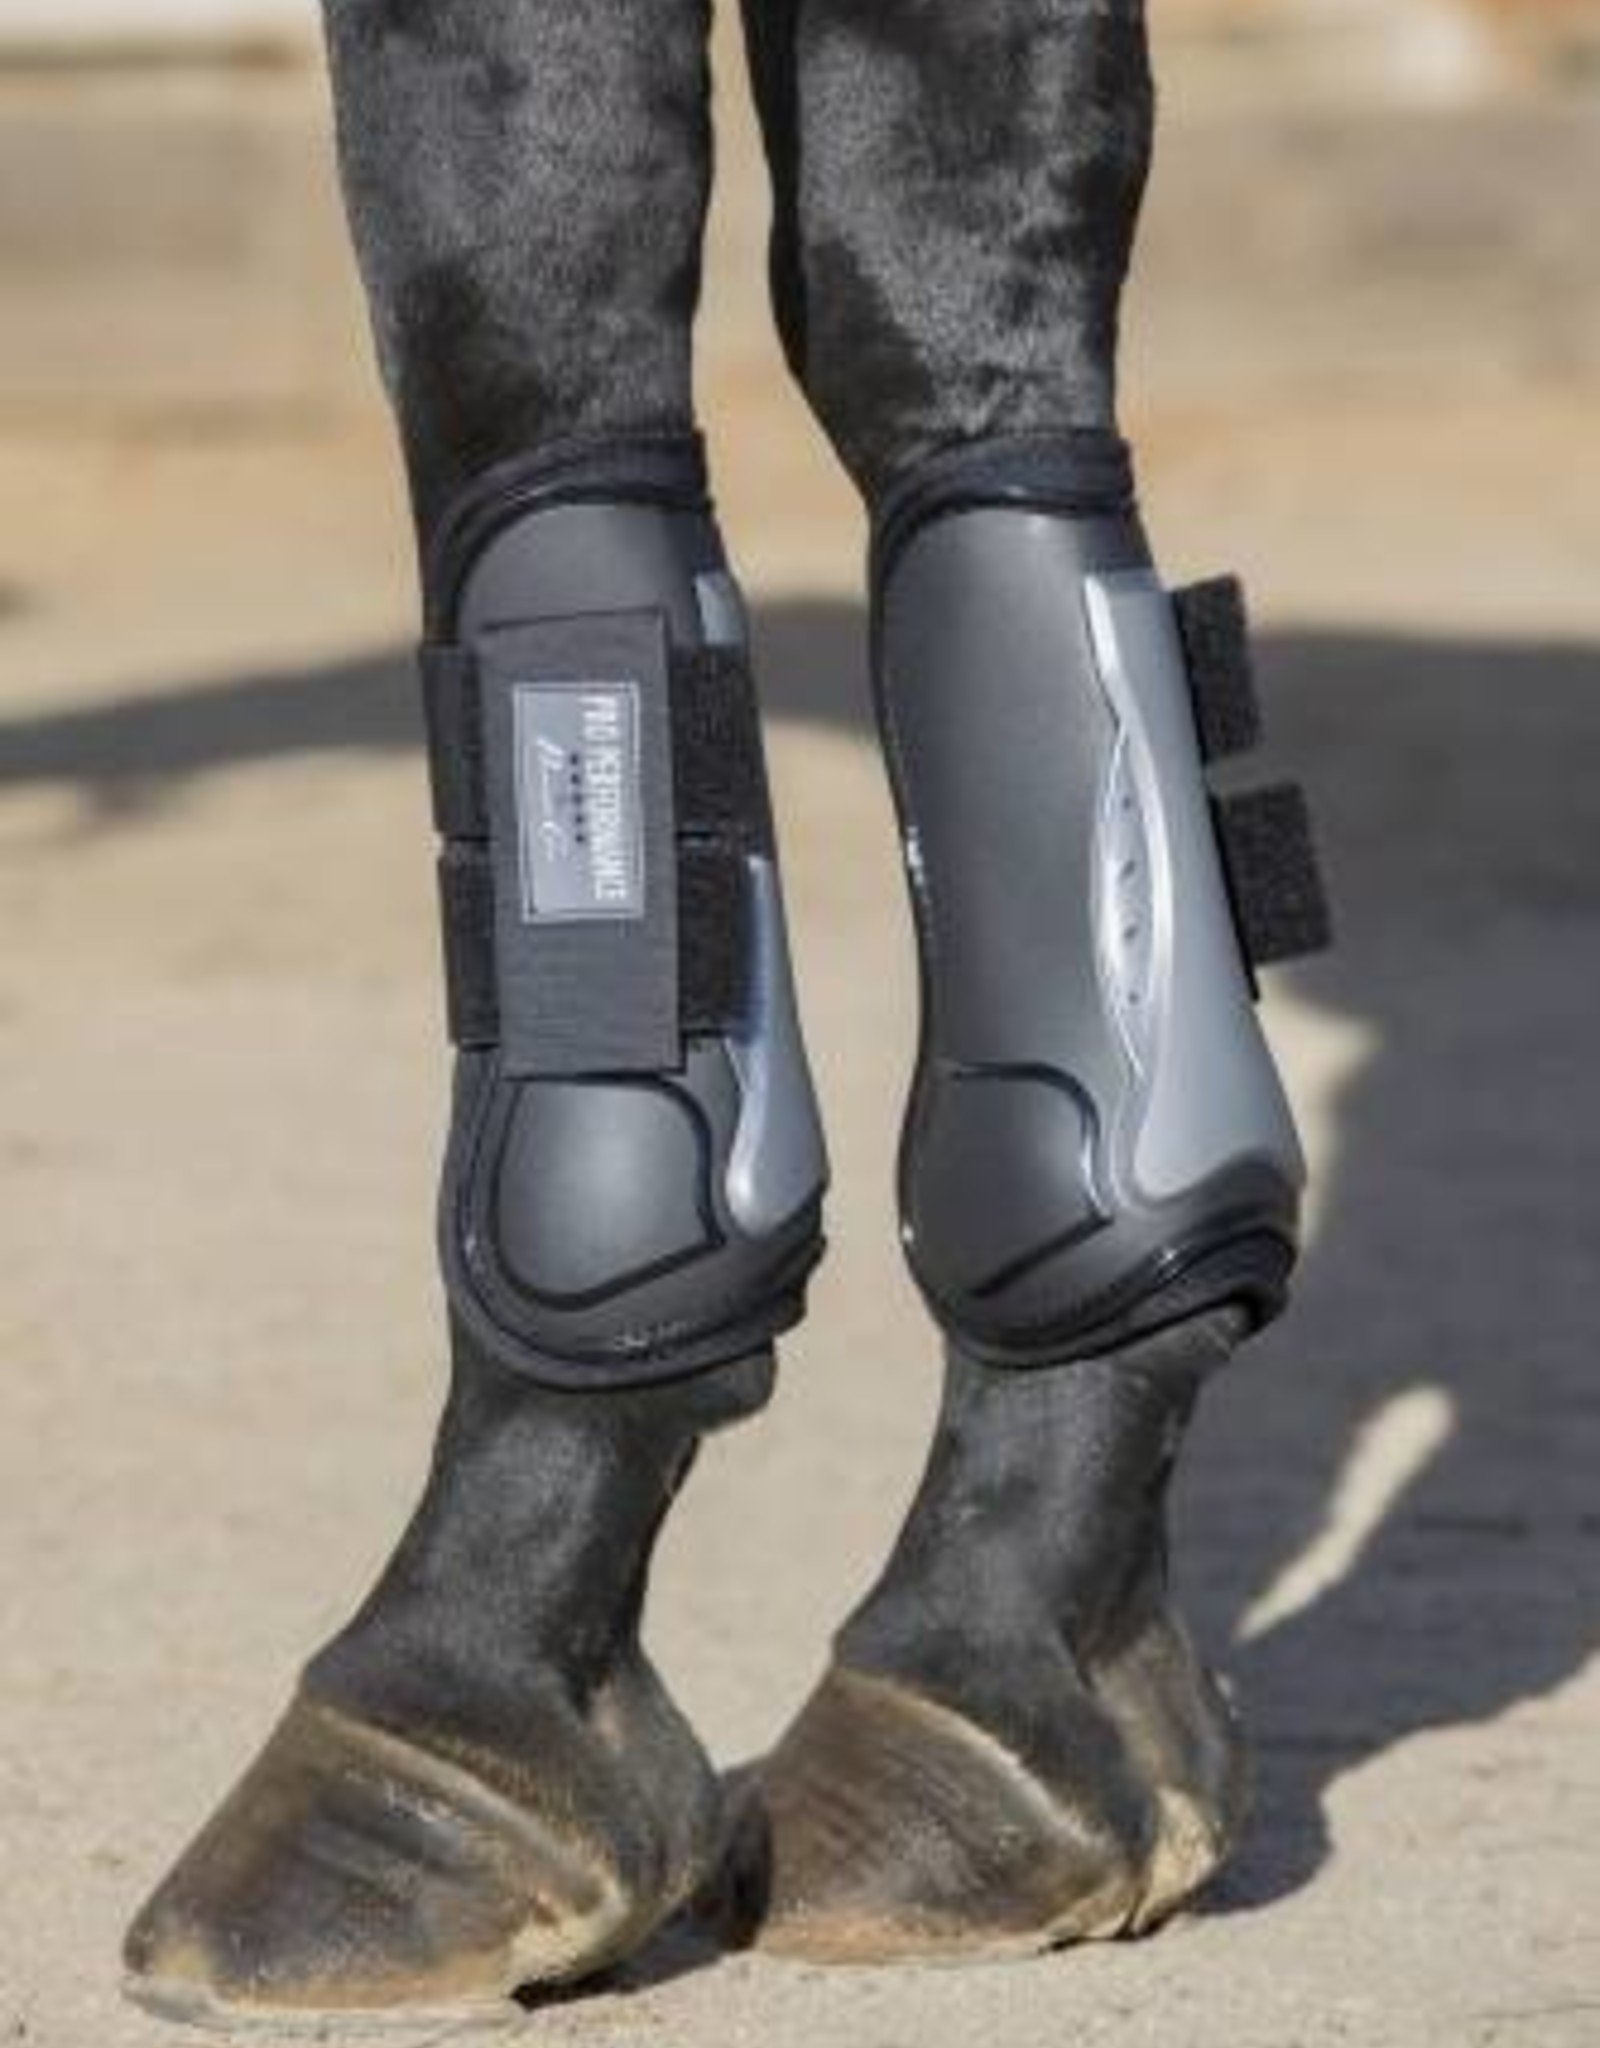 PROFESSIONAL'S CHOICE OPEN FRONT TENDON BOOTS